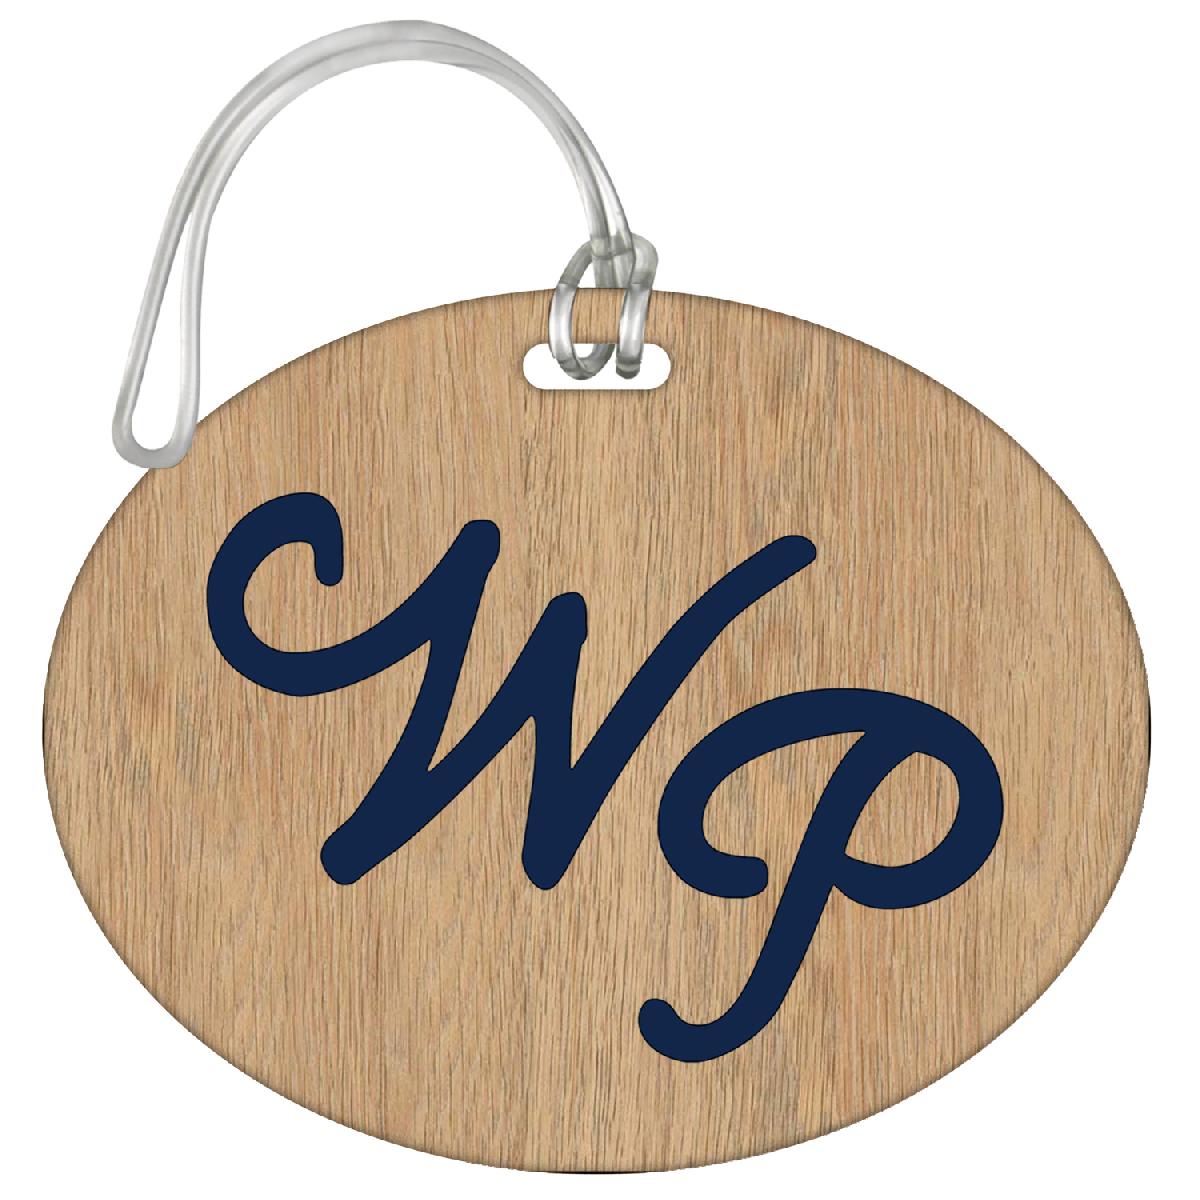 Wooden Bag Tag - 3" X 3.75" - 2 Sided Printing